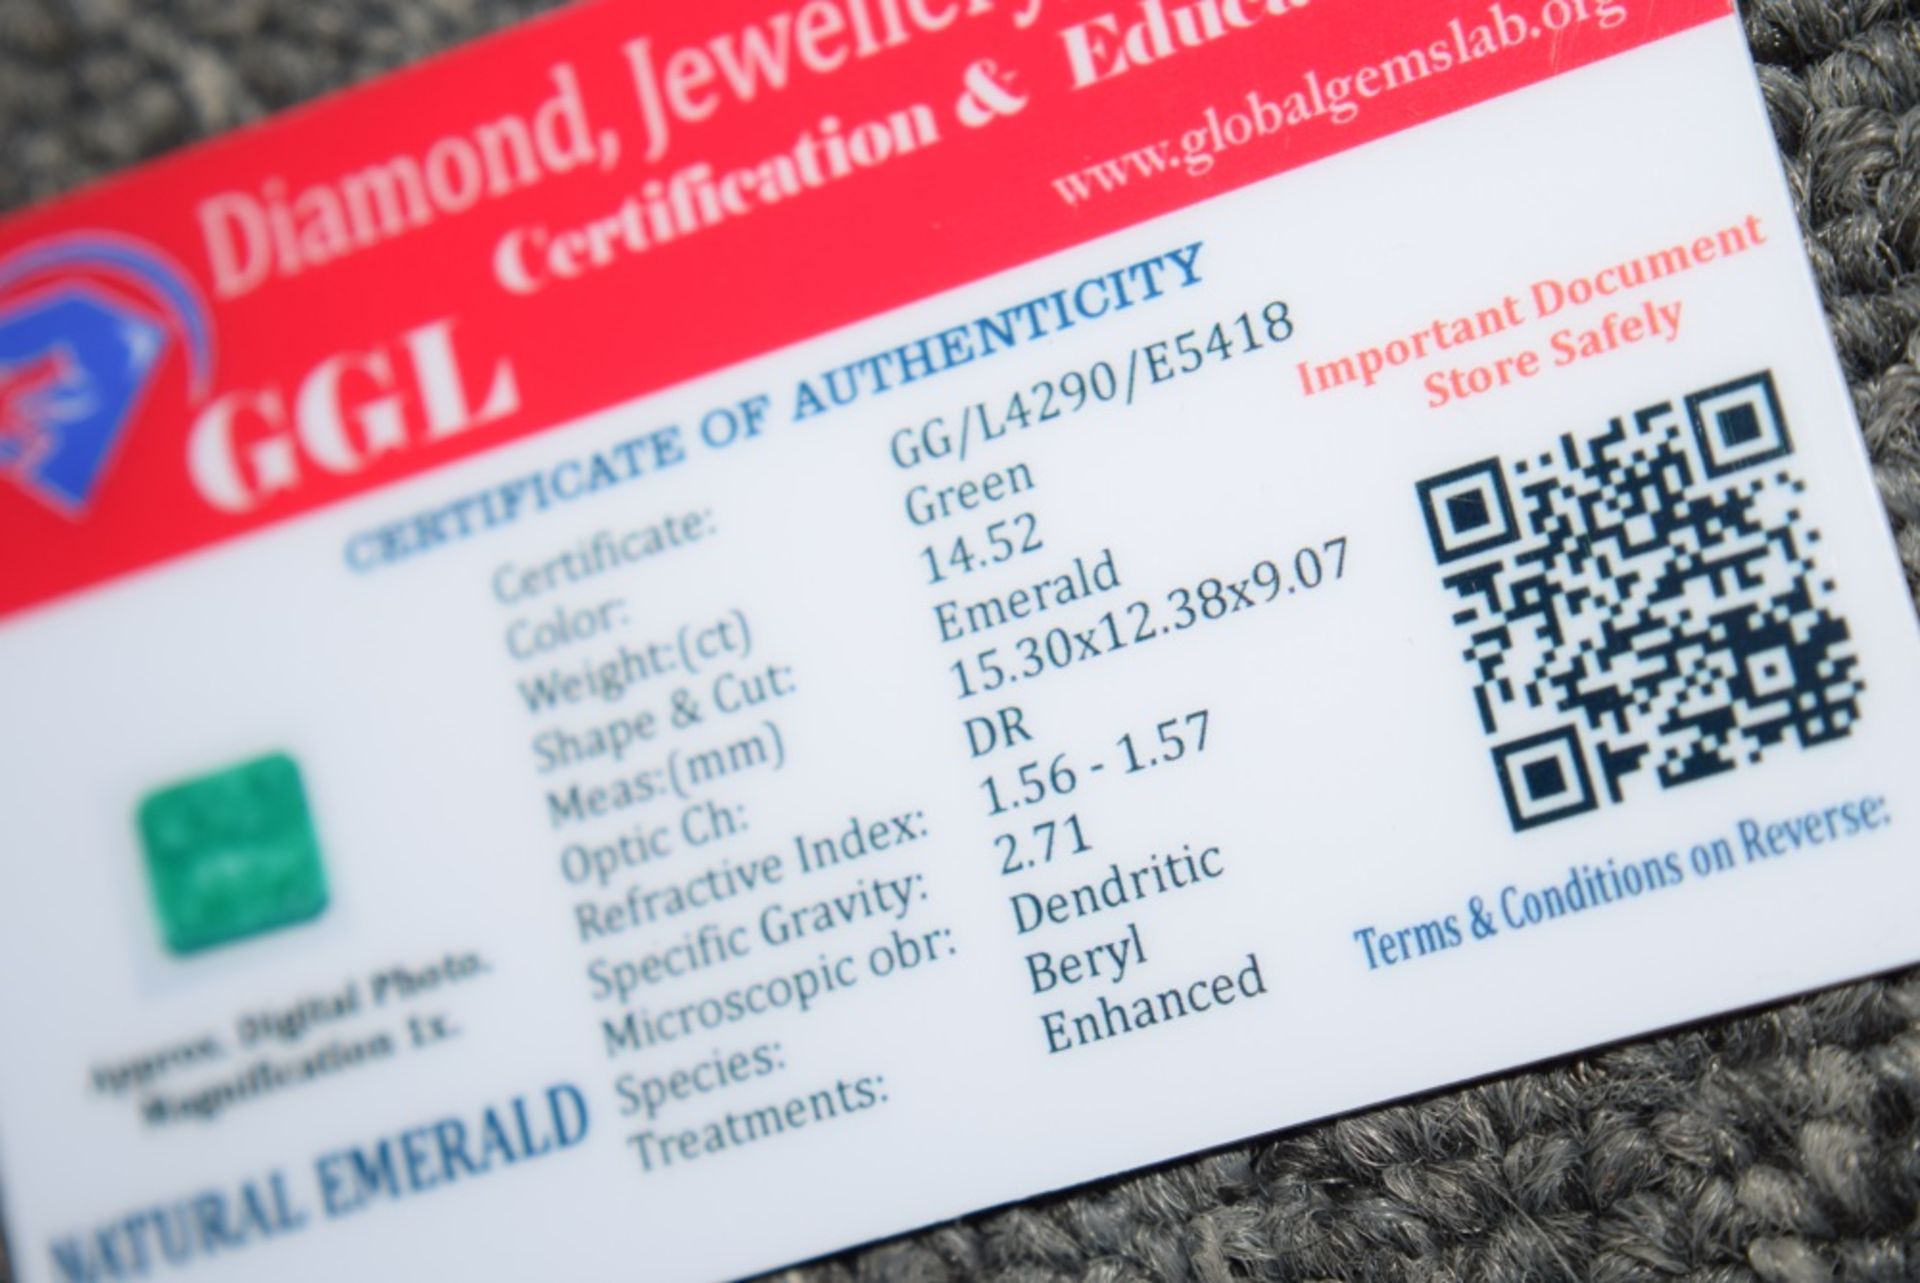 14.52CT Emerald with Certificate Card - Image 2 of 3